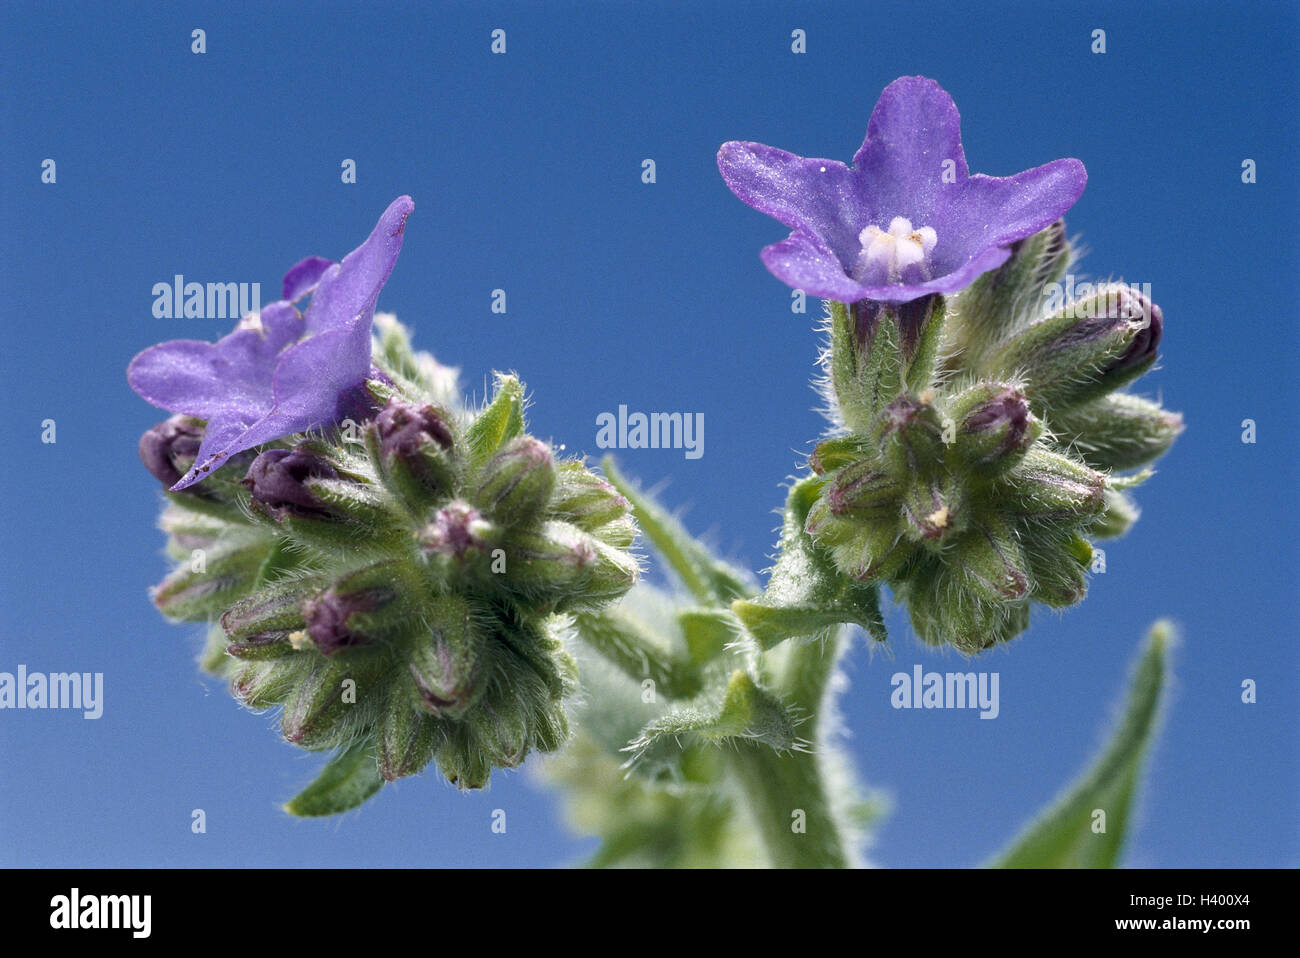 Stinkwurz, Alkanna tinctoria, blossoms, close up, nature, botany, flora, plants, flowers, medicinal plants, Färbepflanze, Färber-Alkanna, Alkanna, borage plants, Boraginaceae, blossom, blossom, blue, period bloom, from May to June, Stock Photo